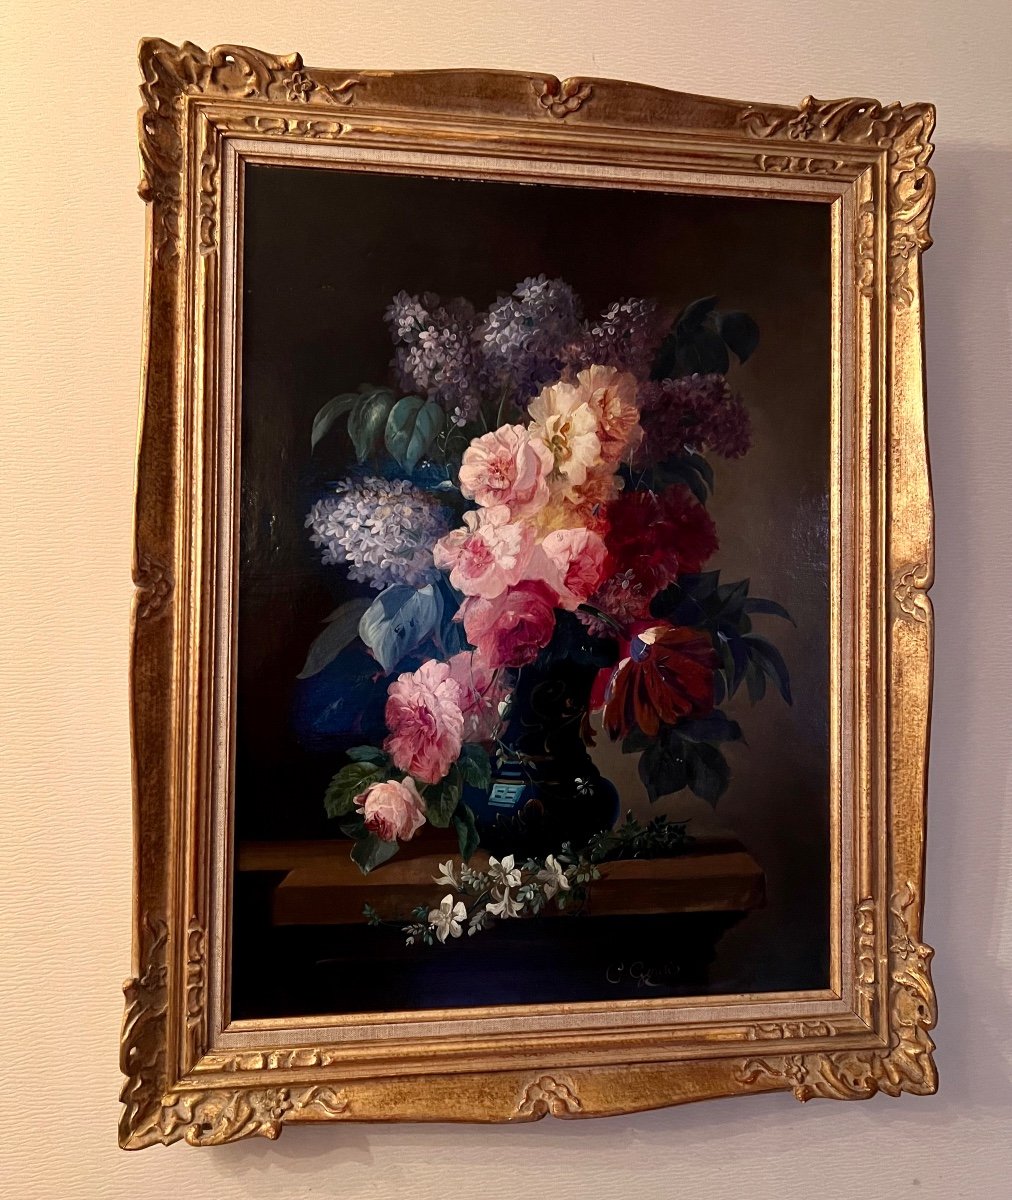 Painting Of A Vase Of Flowers On An Entablature-photo-6